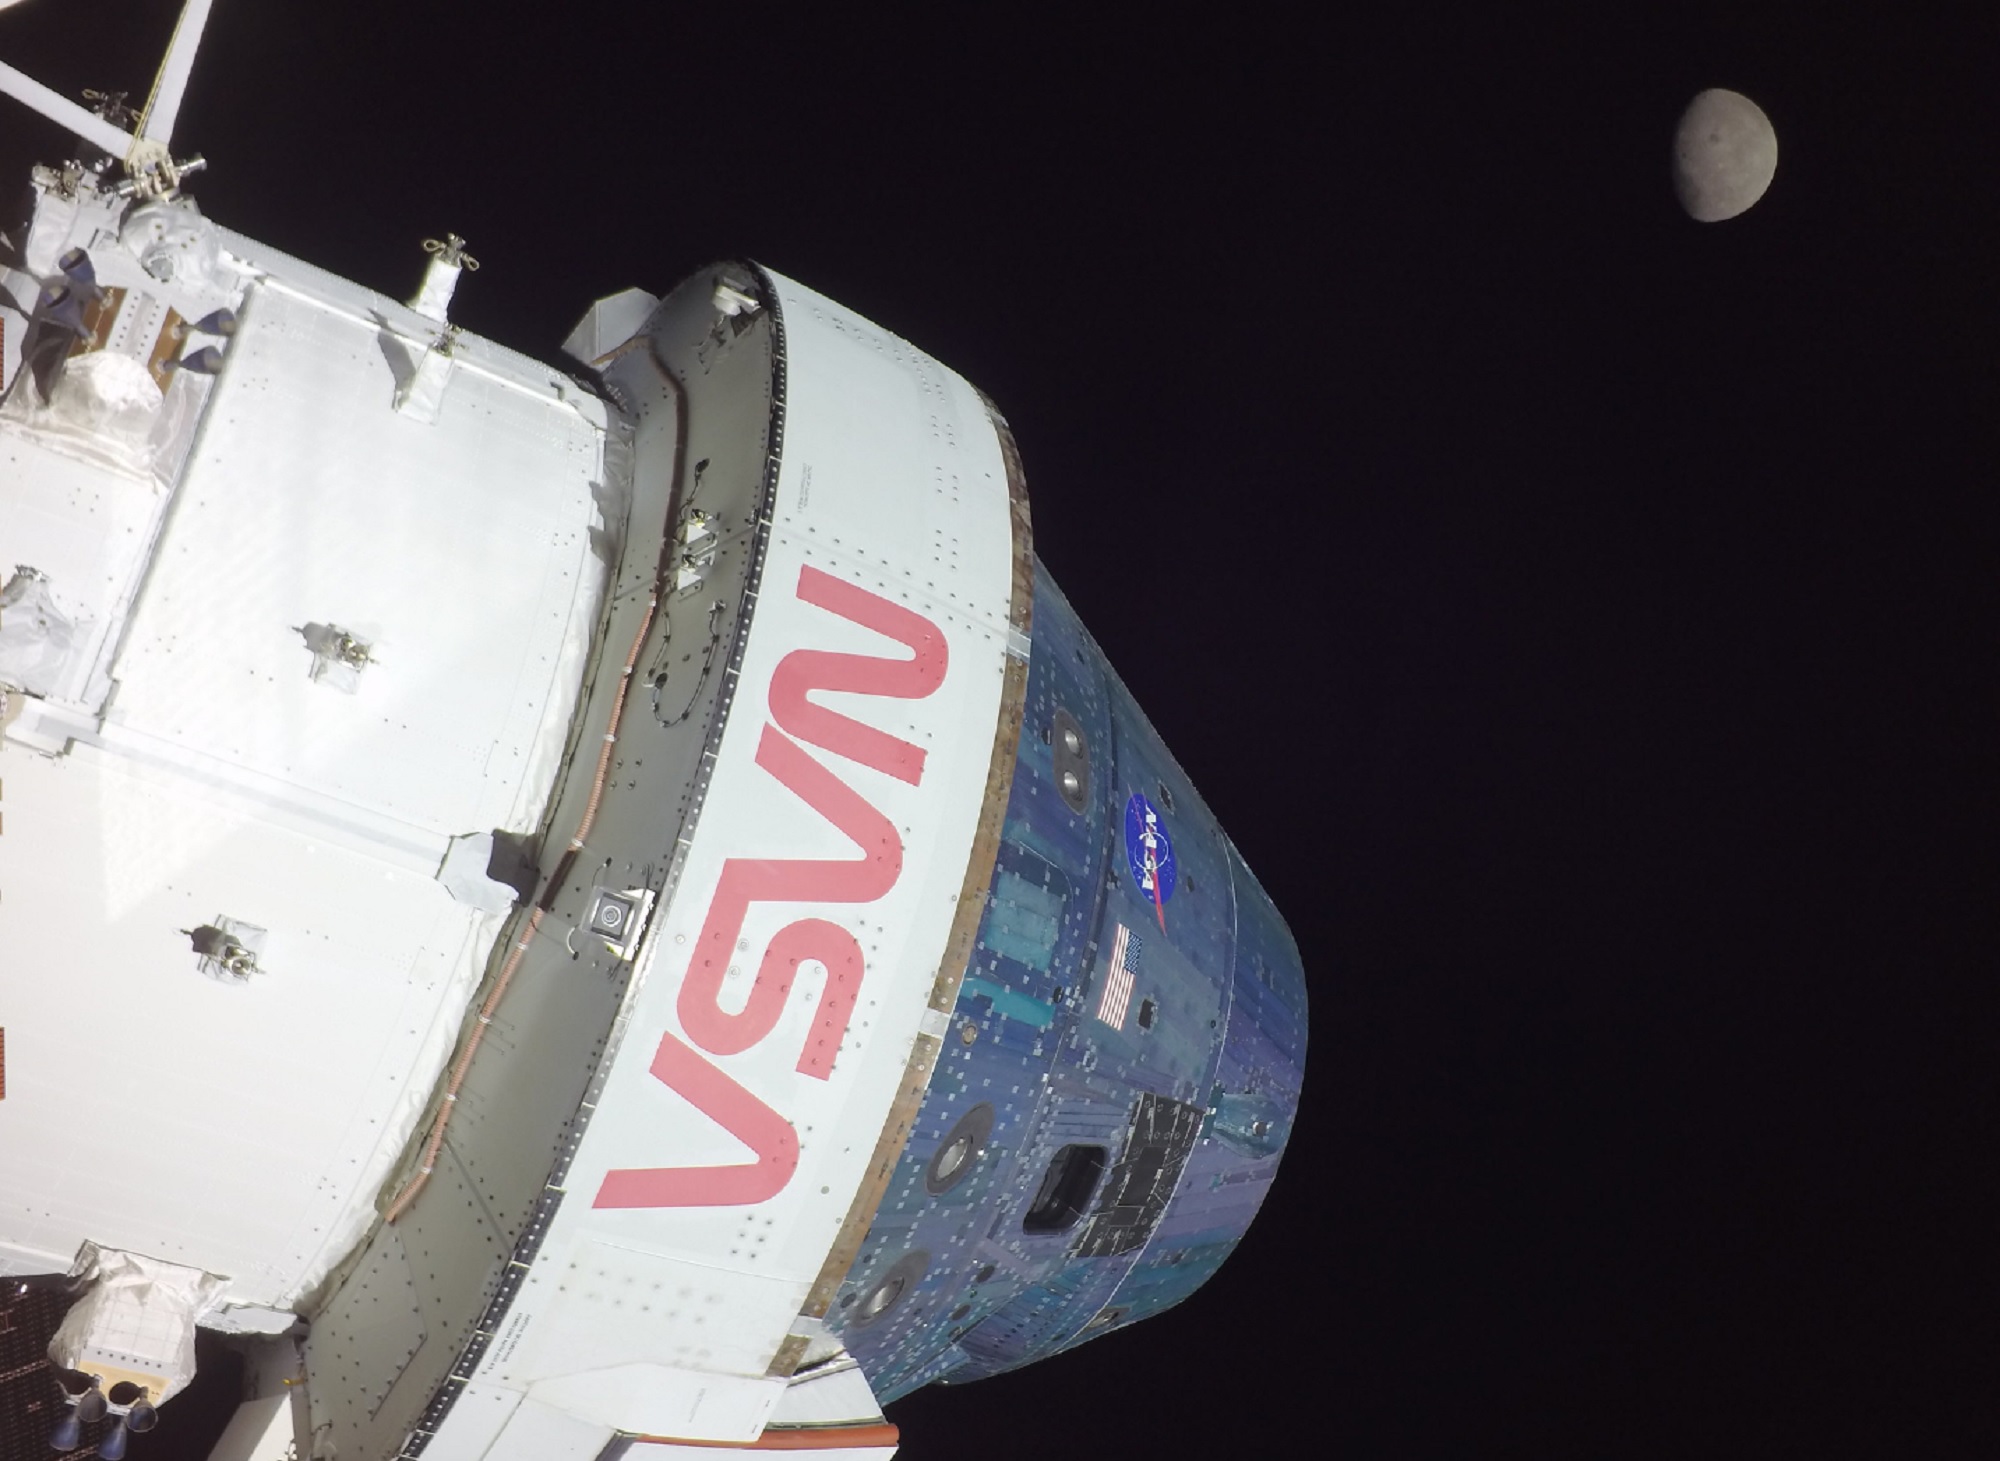 Orion will air kiss the moon today during important Artemis exercise